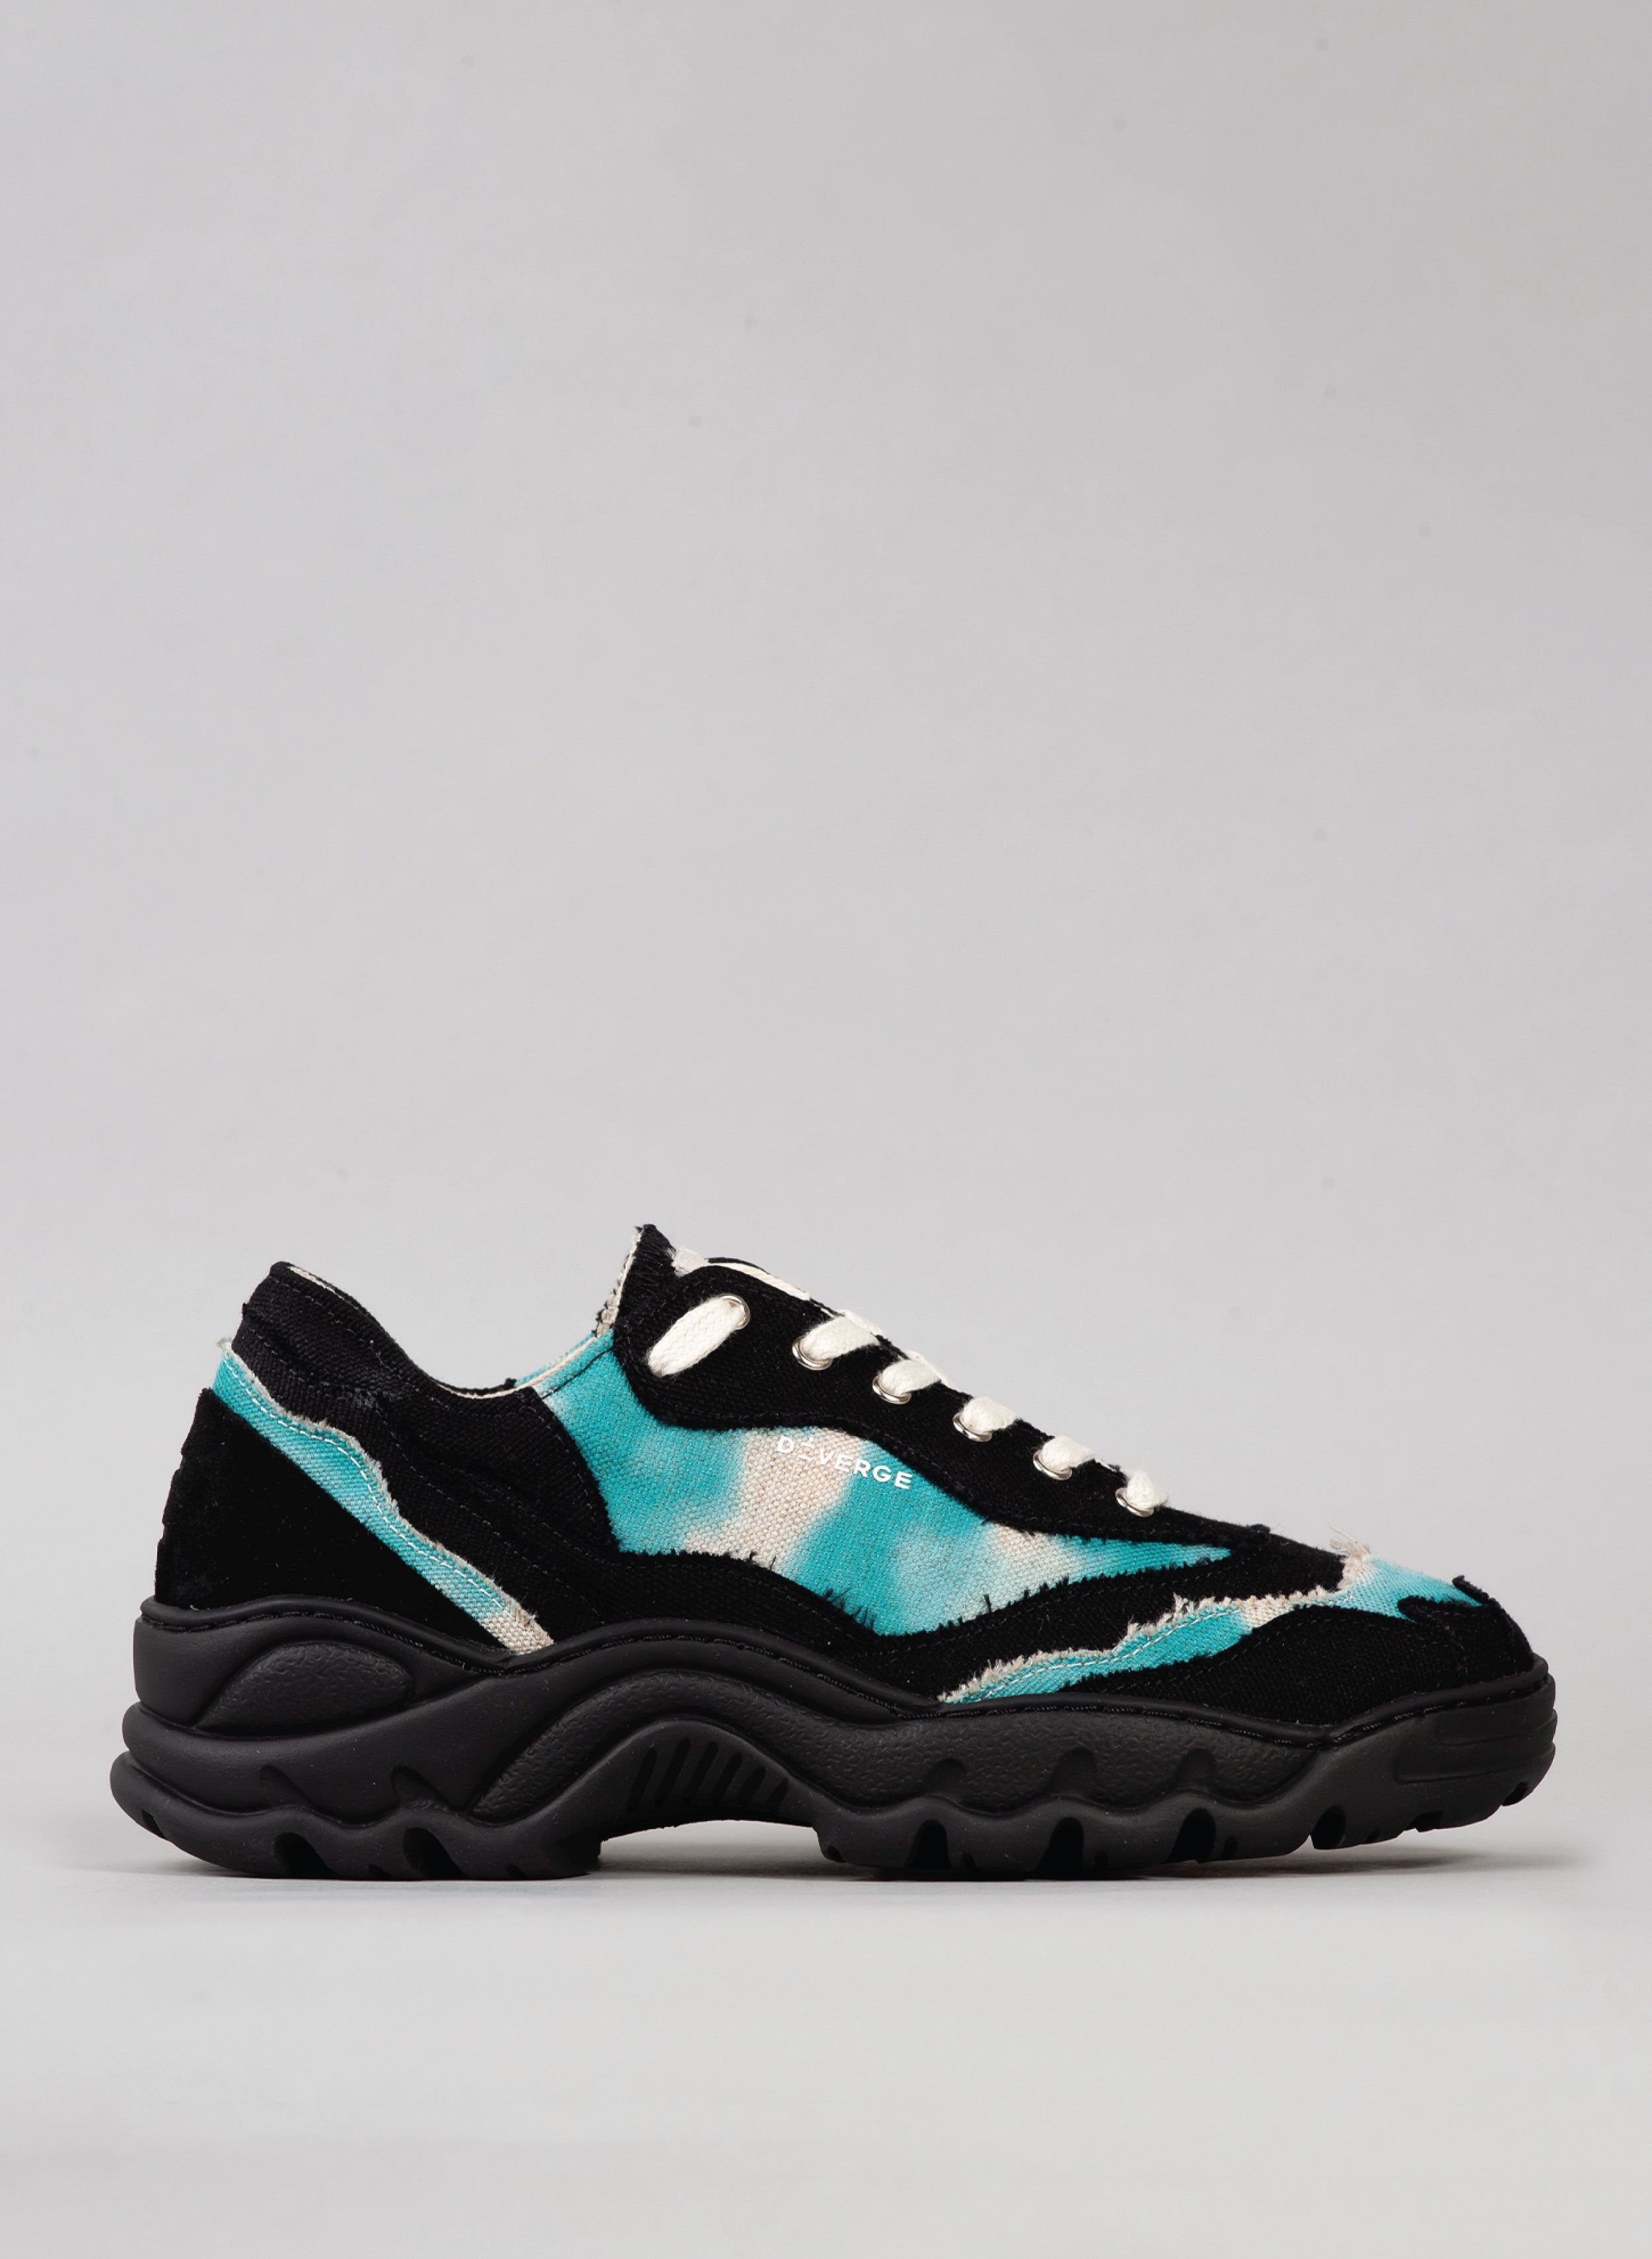 black and tie dye aqua green premium canvas sneakers landscape with sophisticated silhouette sideview